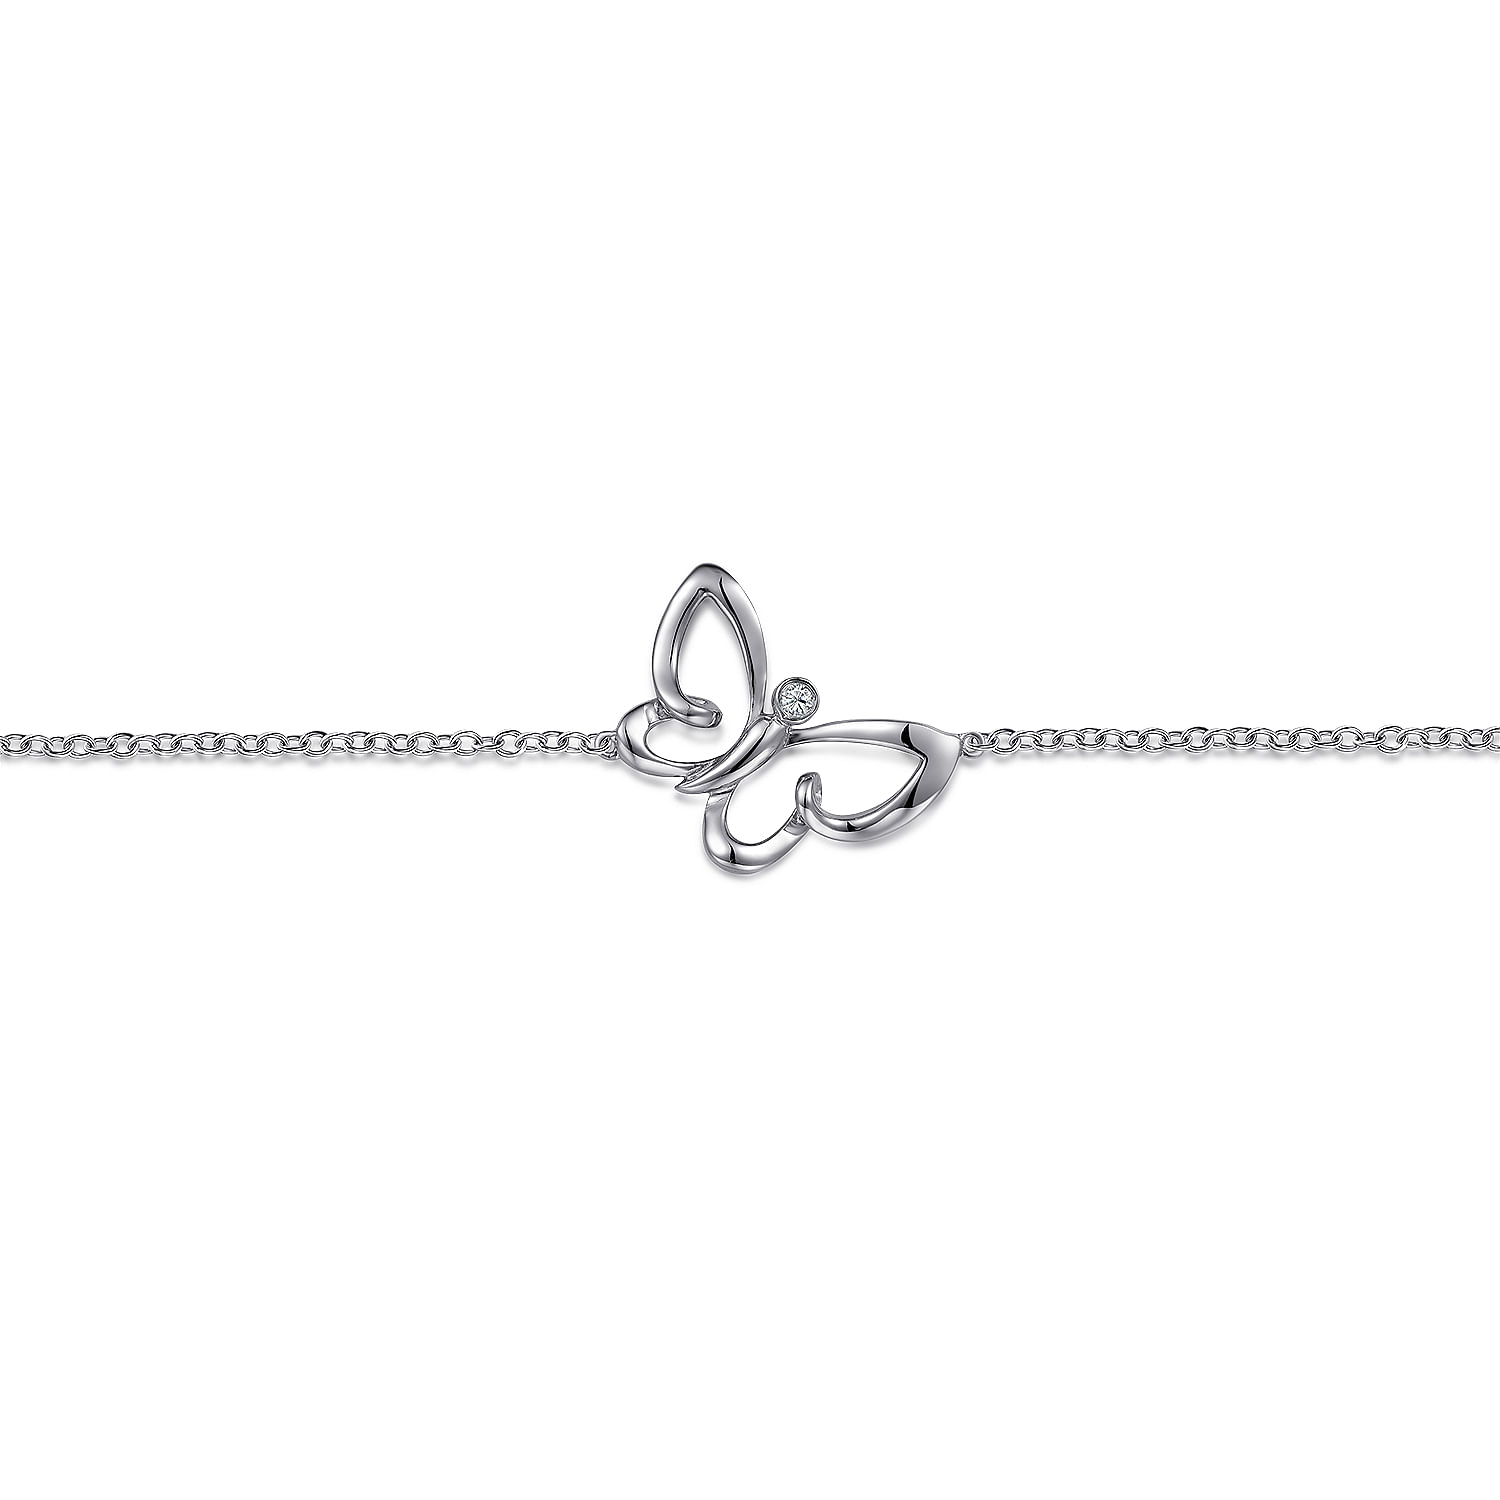 Sterling Silver Chain Bracelet with White Sapphire Butterfly Charm